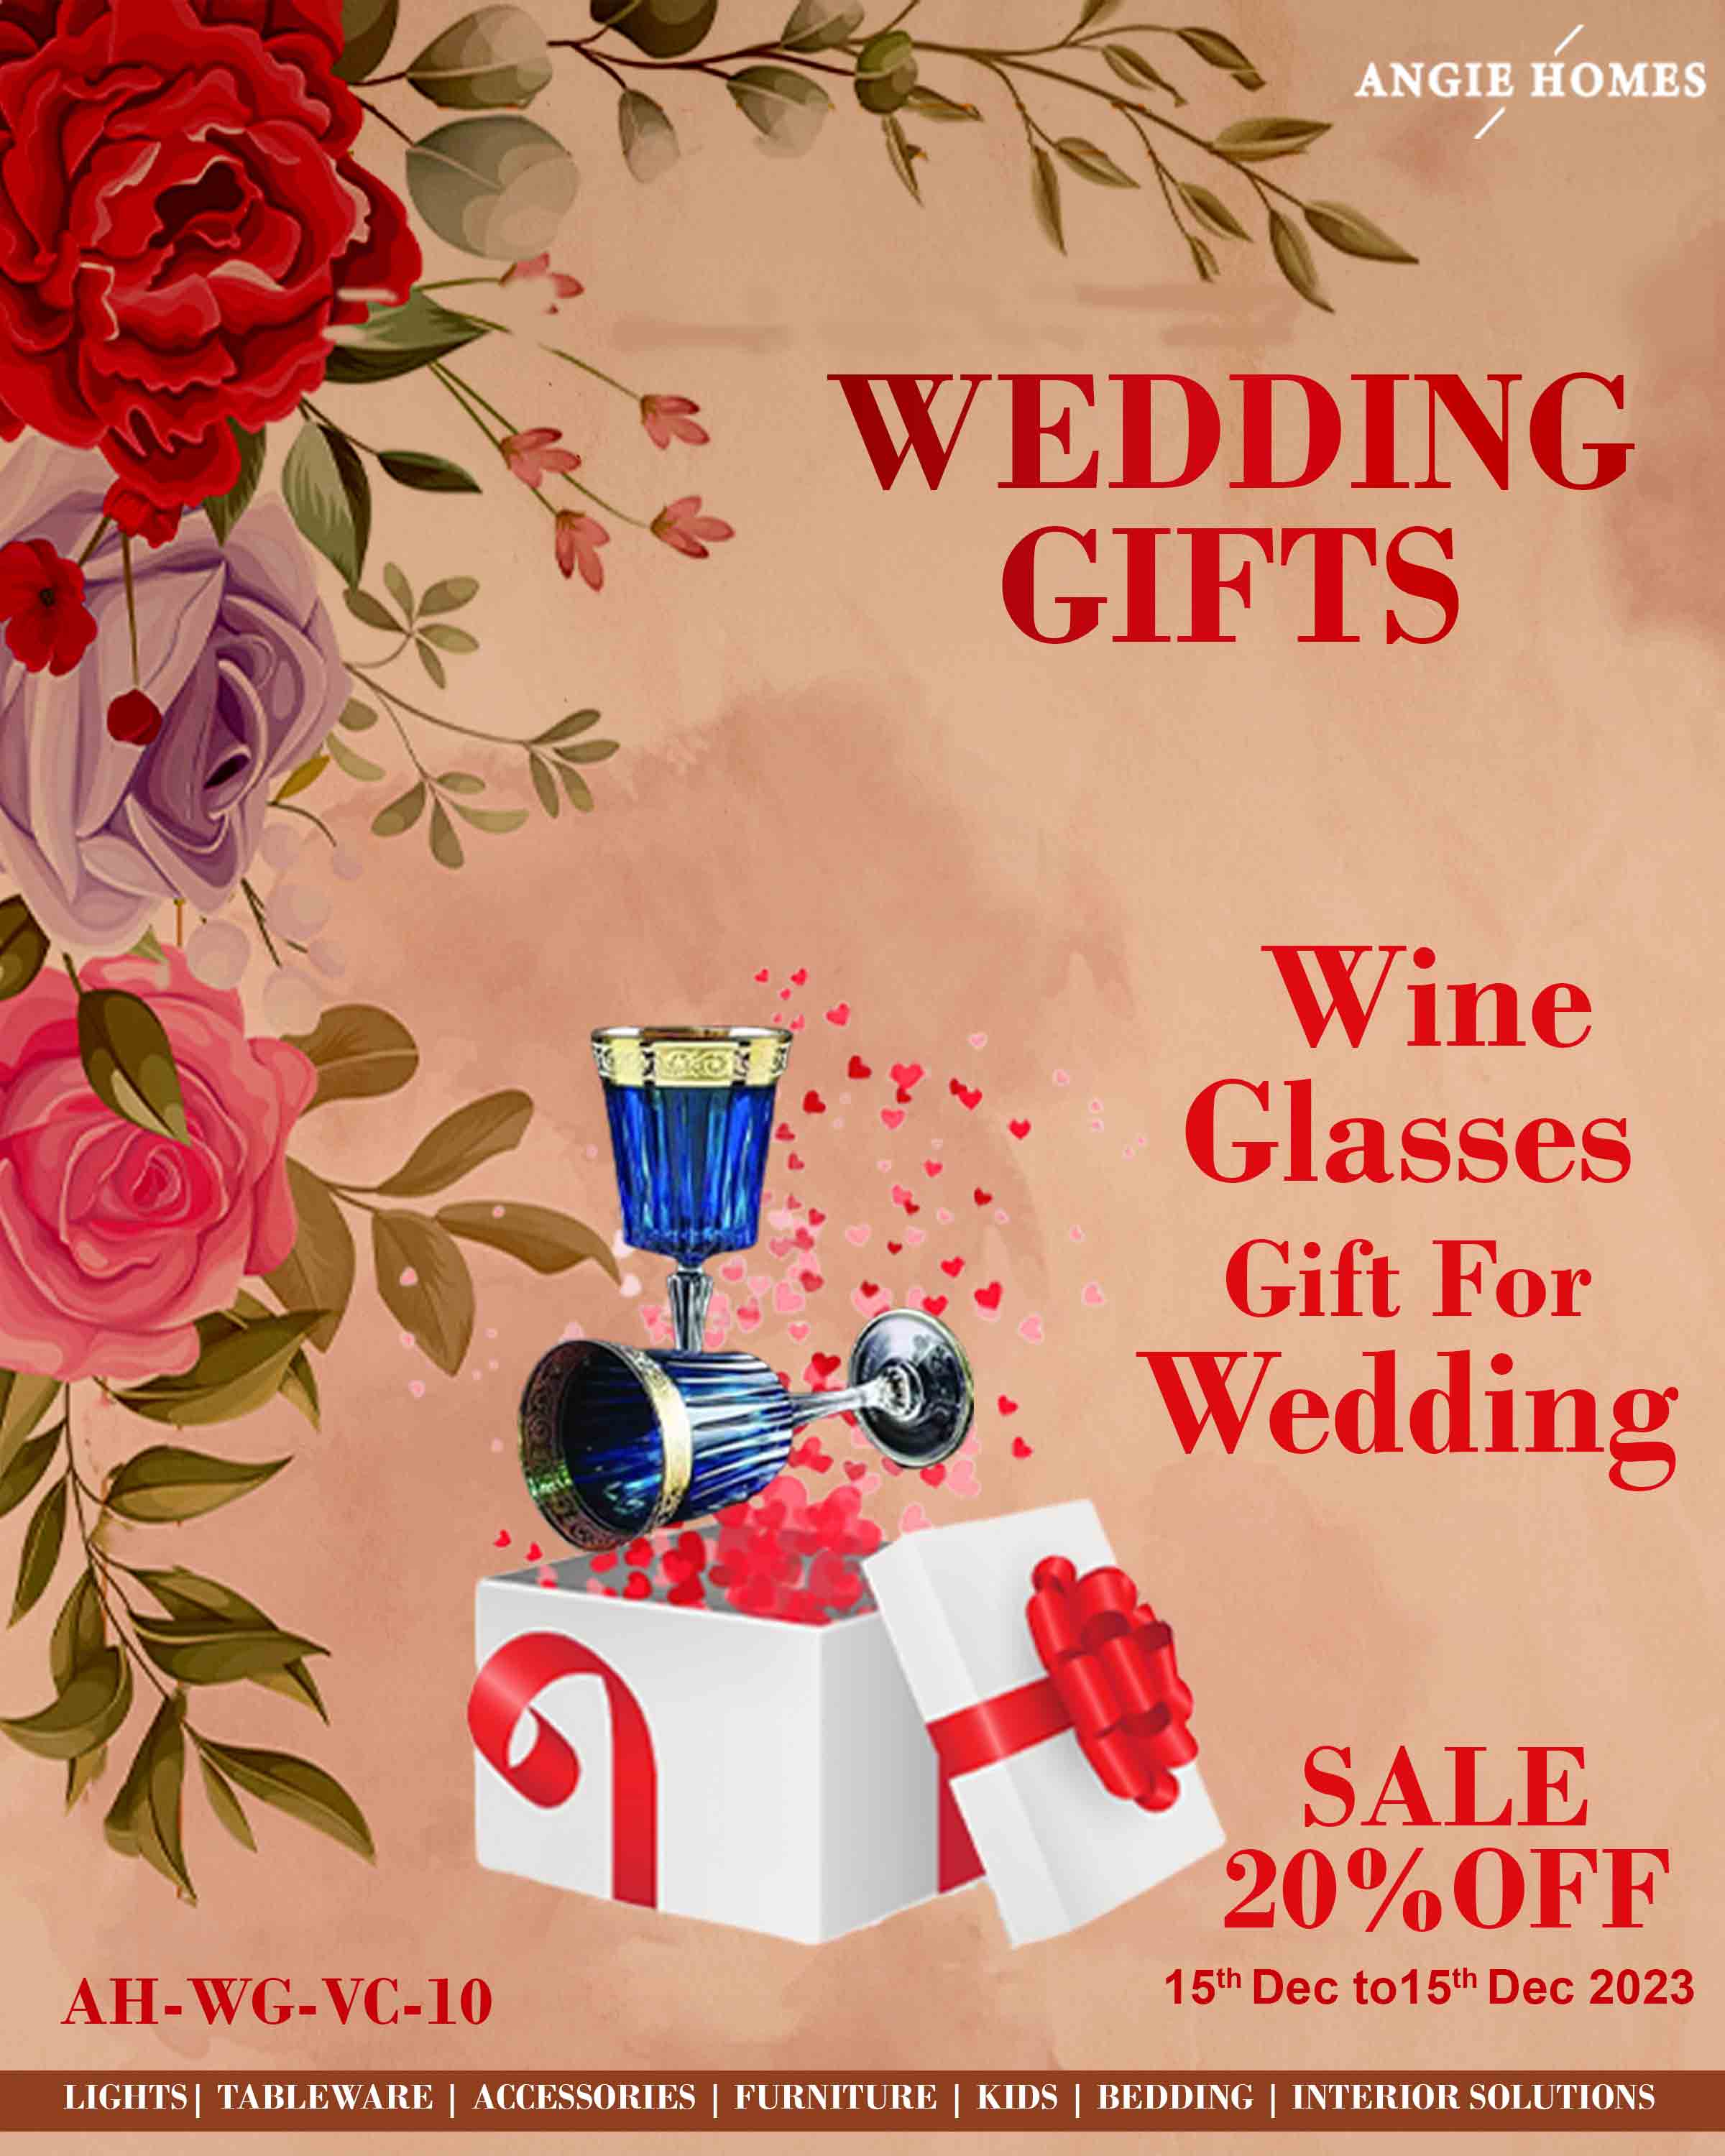 WINE GLASS SET FOR WEDDING GIFTS | MARRIAGE GIFT VOUCHER | PREMIUM DRINKWARE GIFTTING CARD ANGIE HOMES